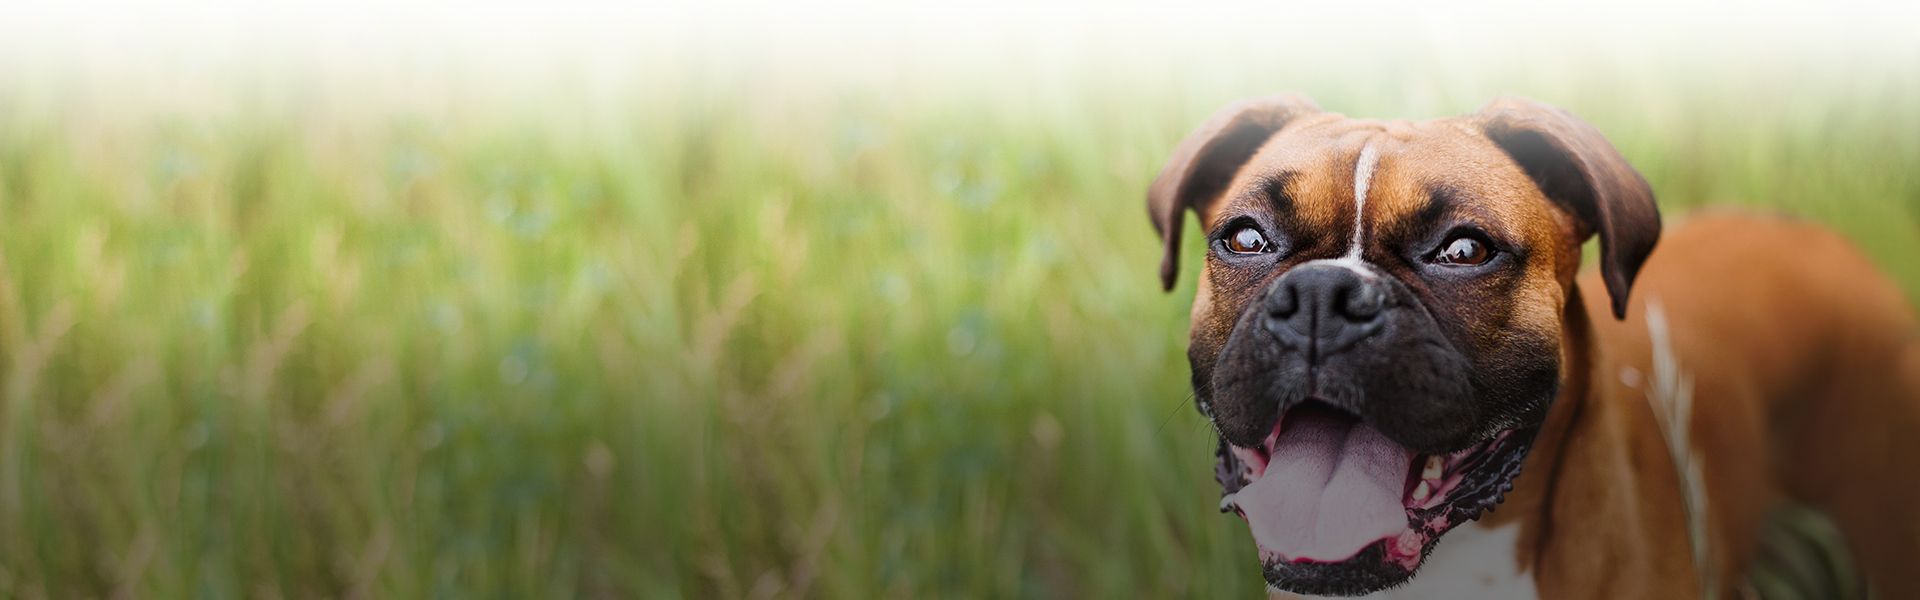 happy brown and white bullmastiff dog looking at camera with grass in the background